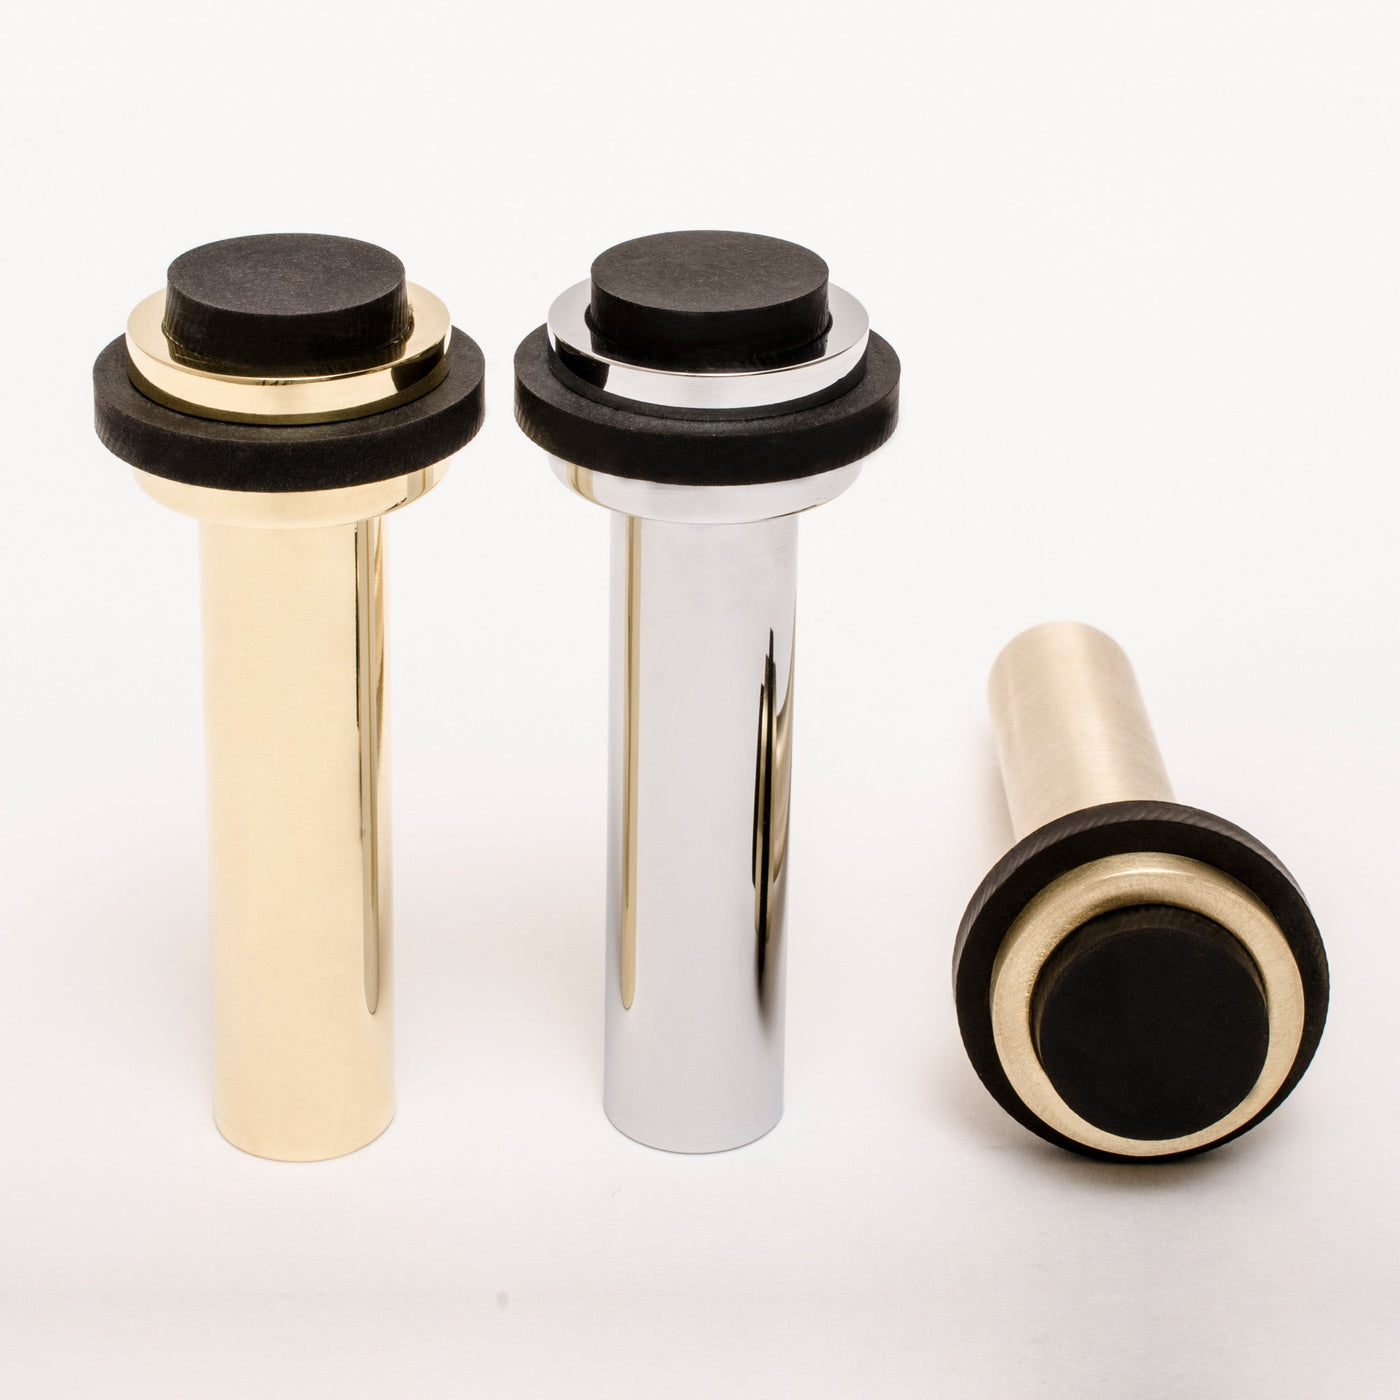 A set of three Baccman Berglund Dot Door Stop knobs in black and gold.